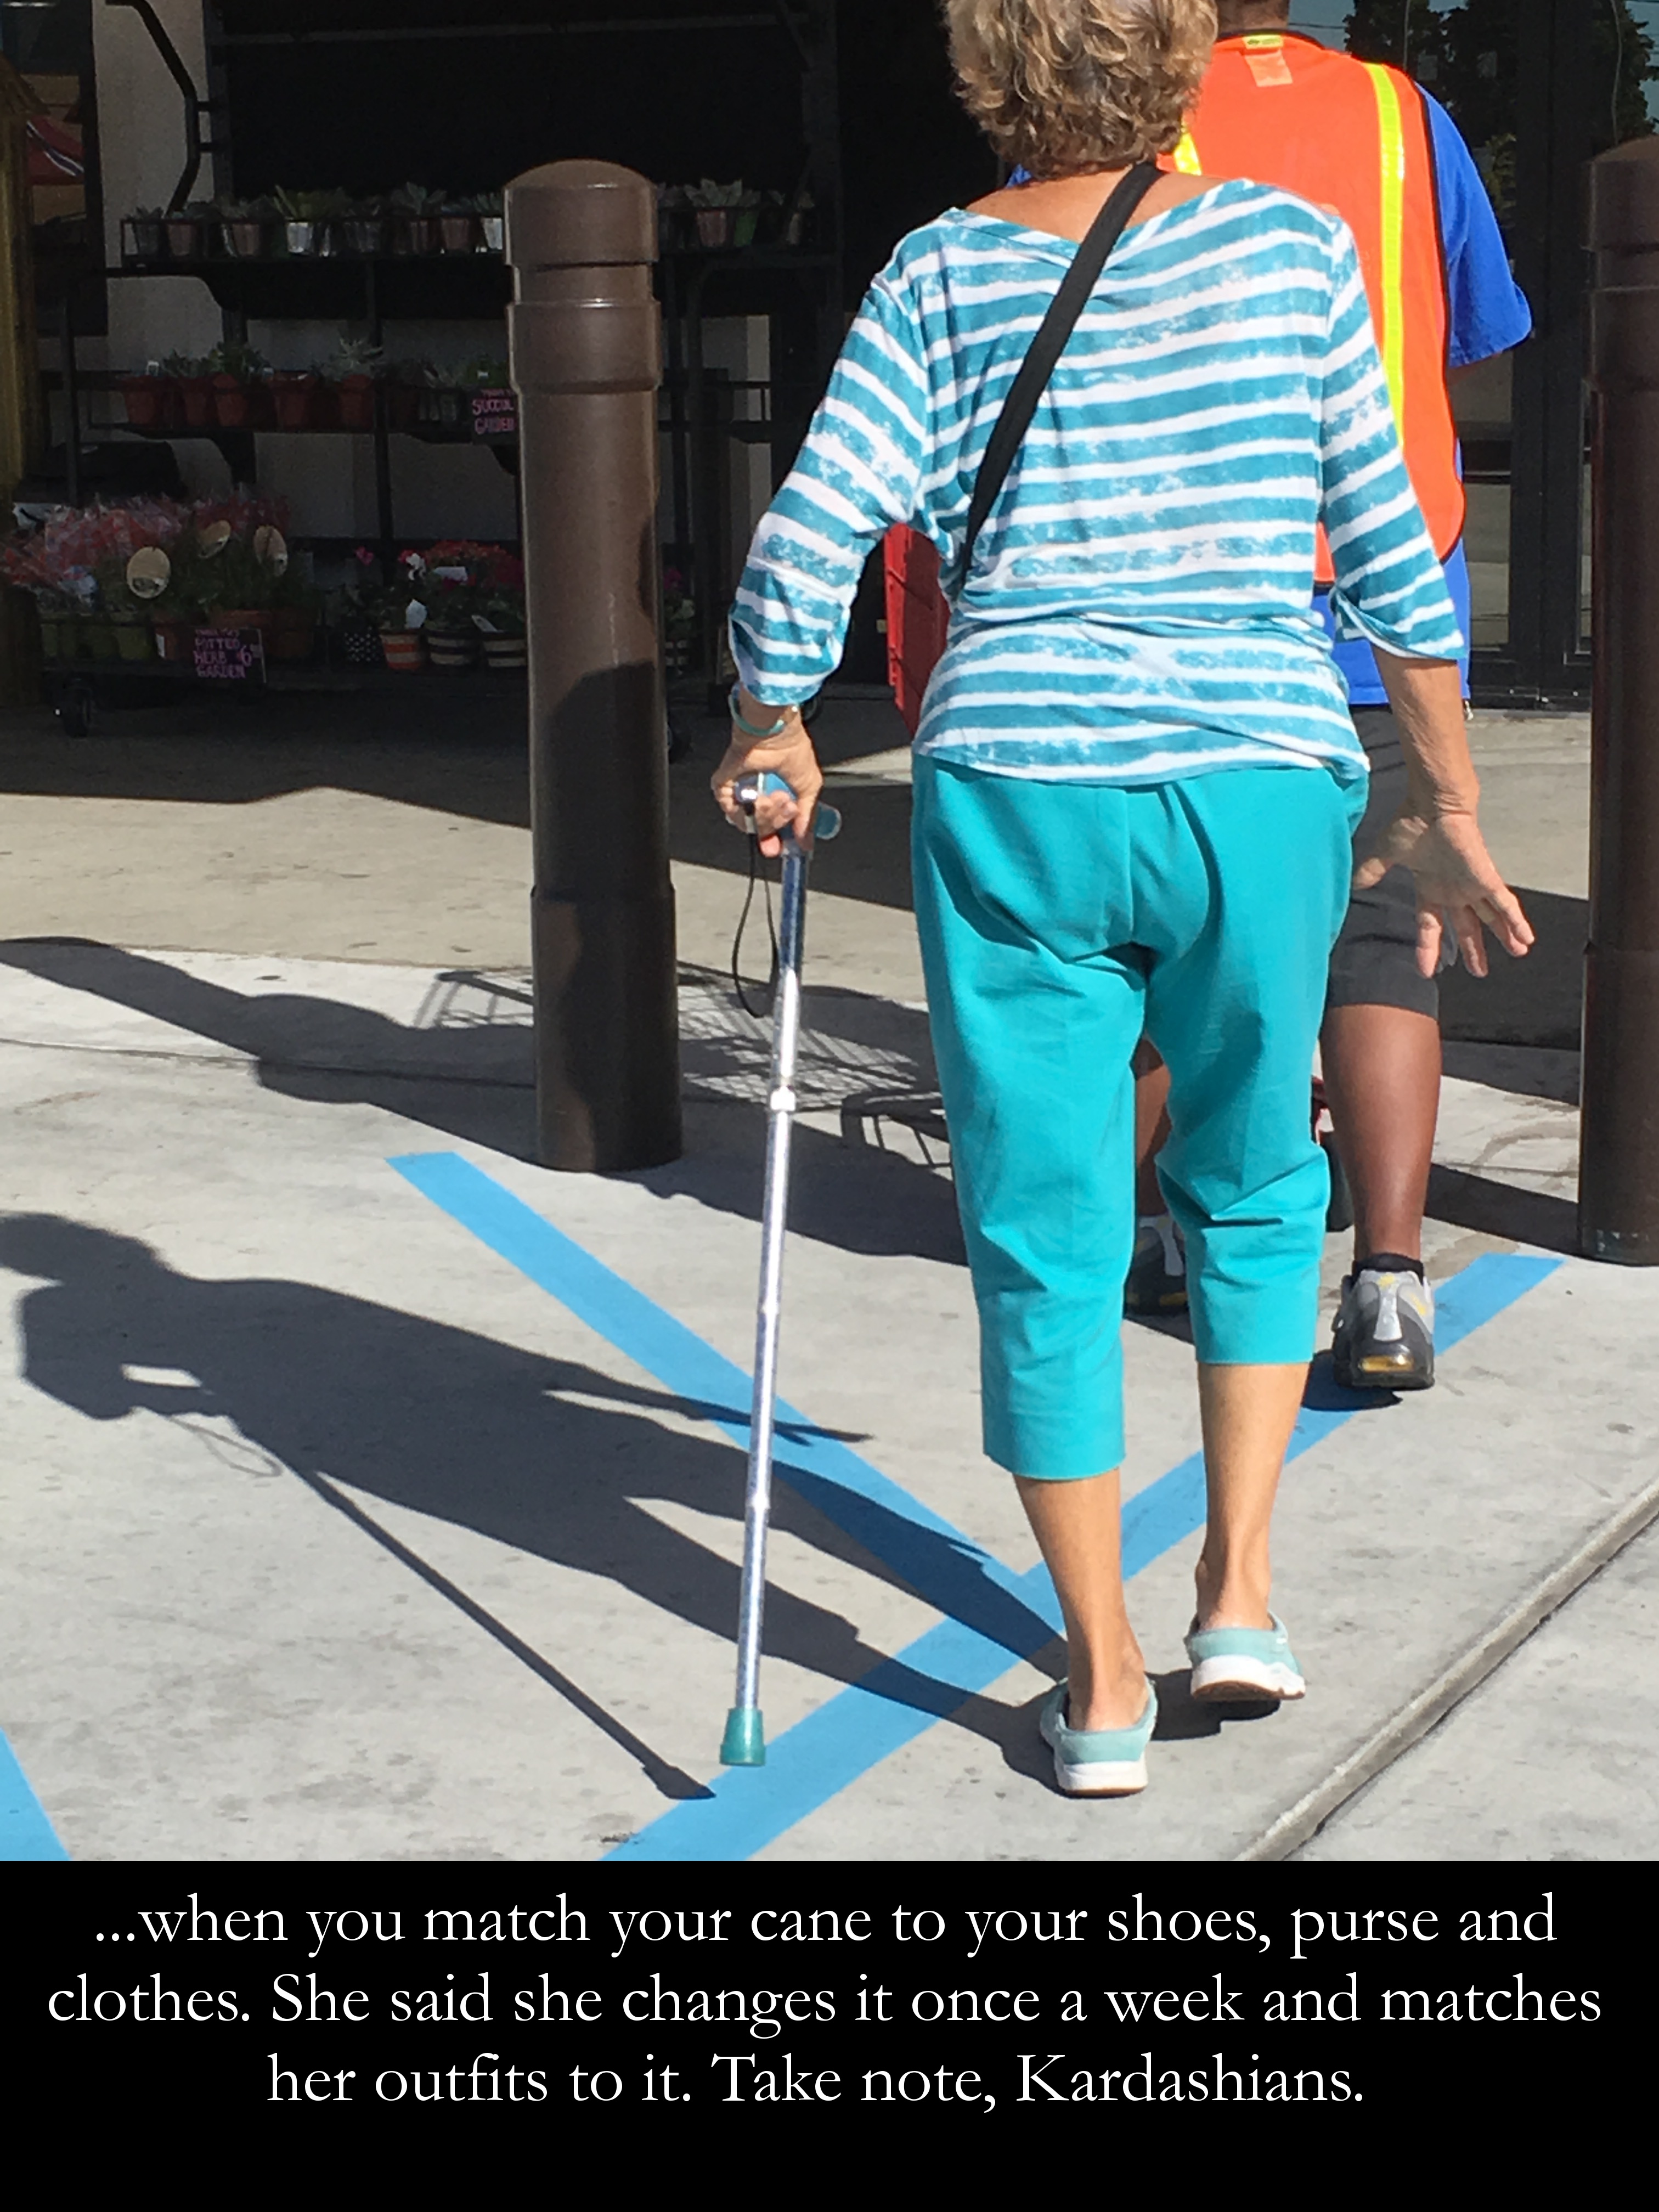 standing - ...when you match your cane to your shoes, purse and clothes. She said she changes it once a week and matches her outfits to it. Take note, Kardashians.